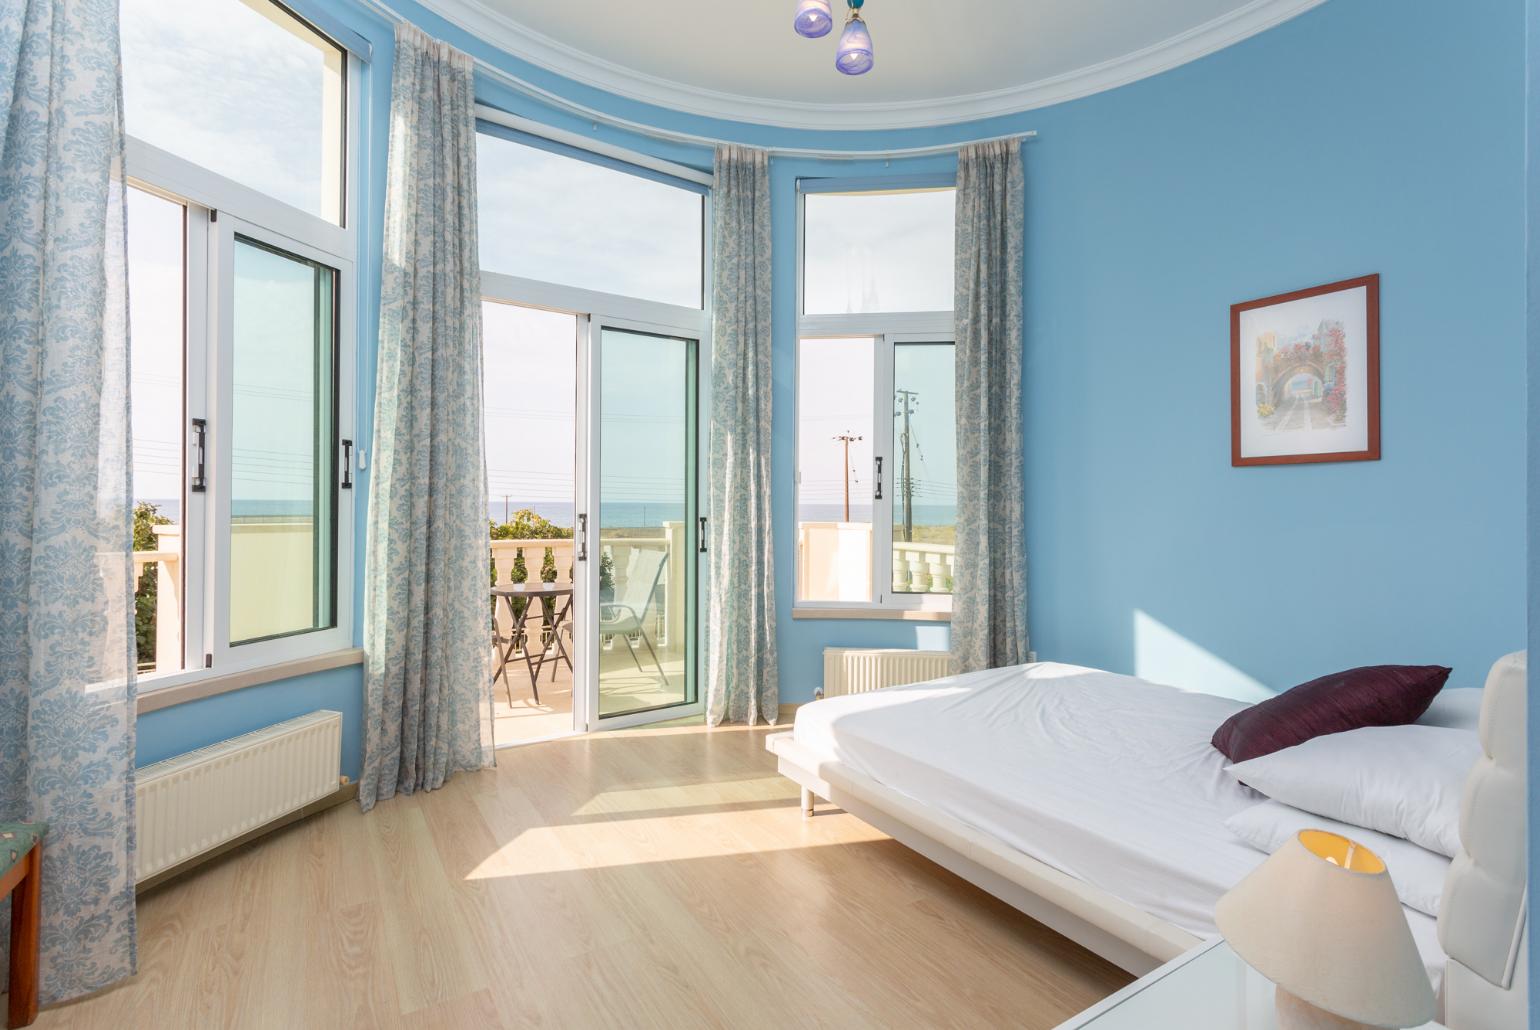 Double bedroom with en suite bathroom, A/C, and balcony access with sea views